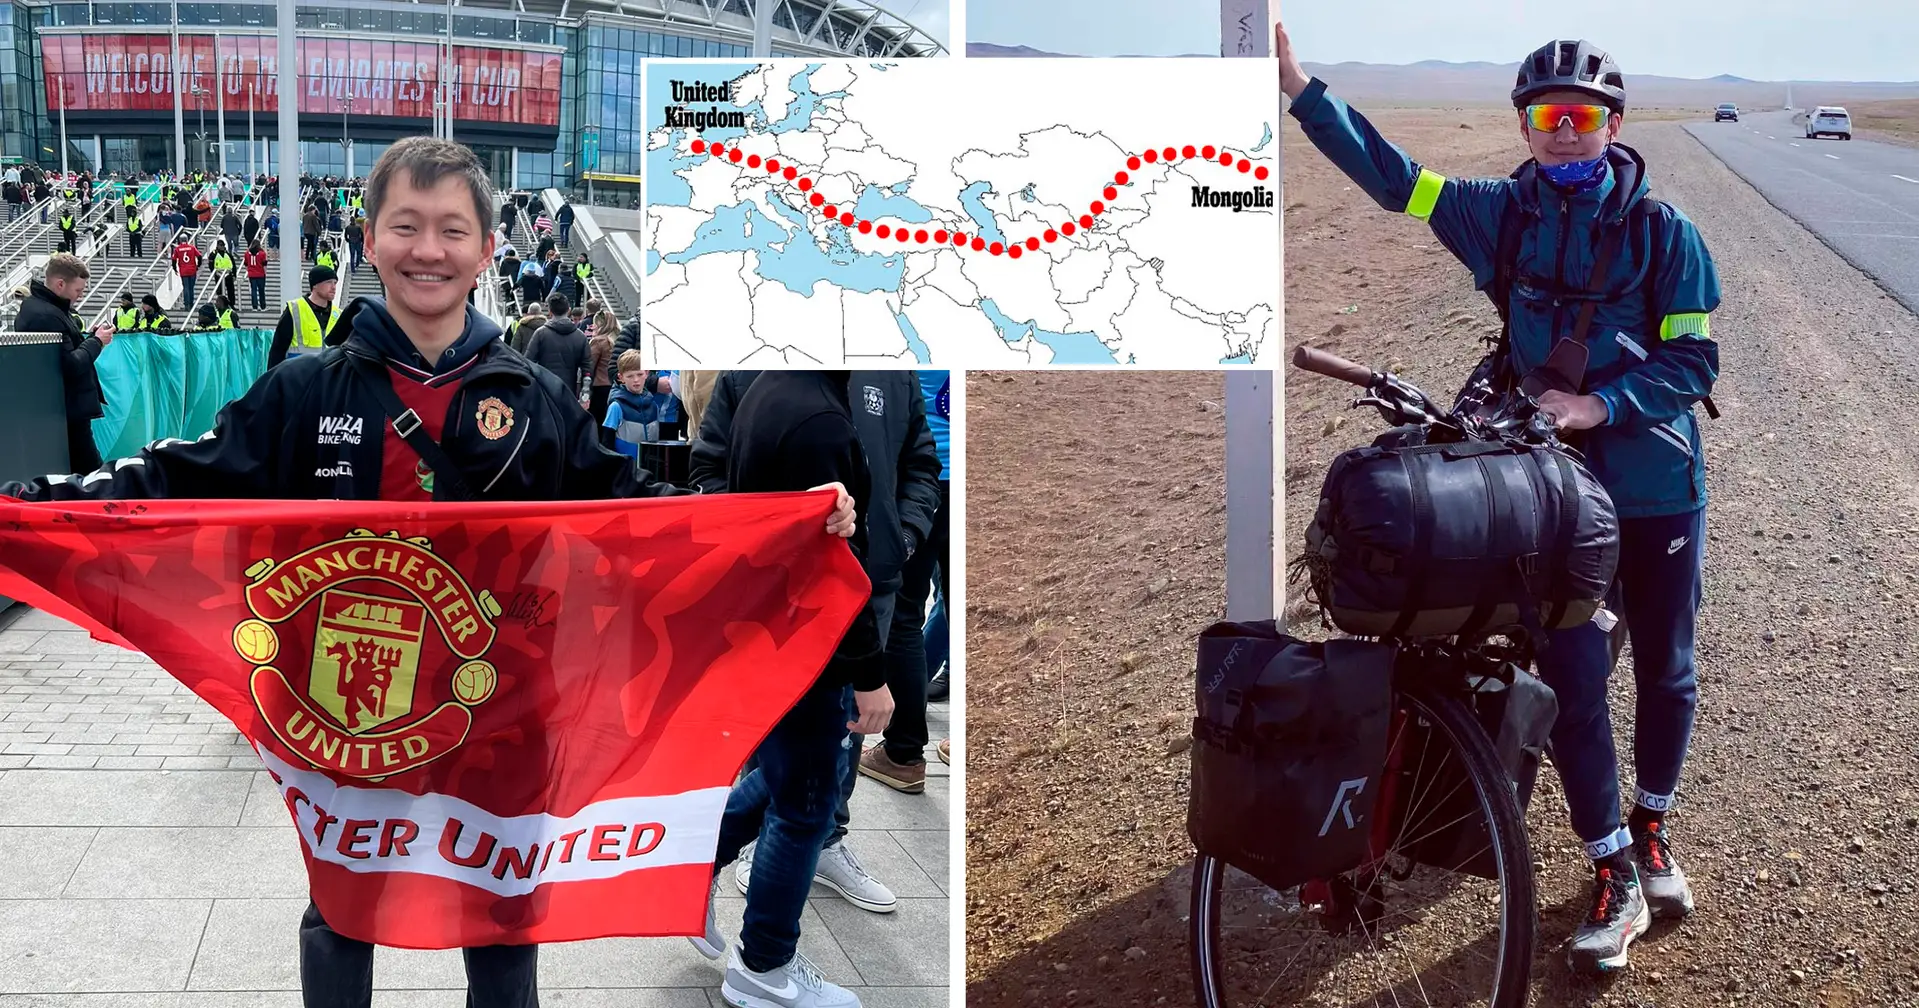 Man United fan cycled from Mongolia to England to watch United play - it took him 11 months